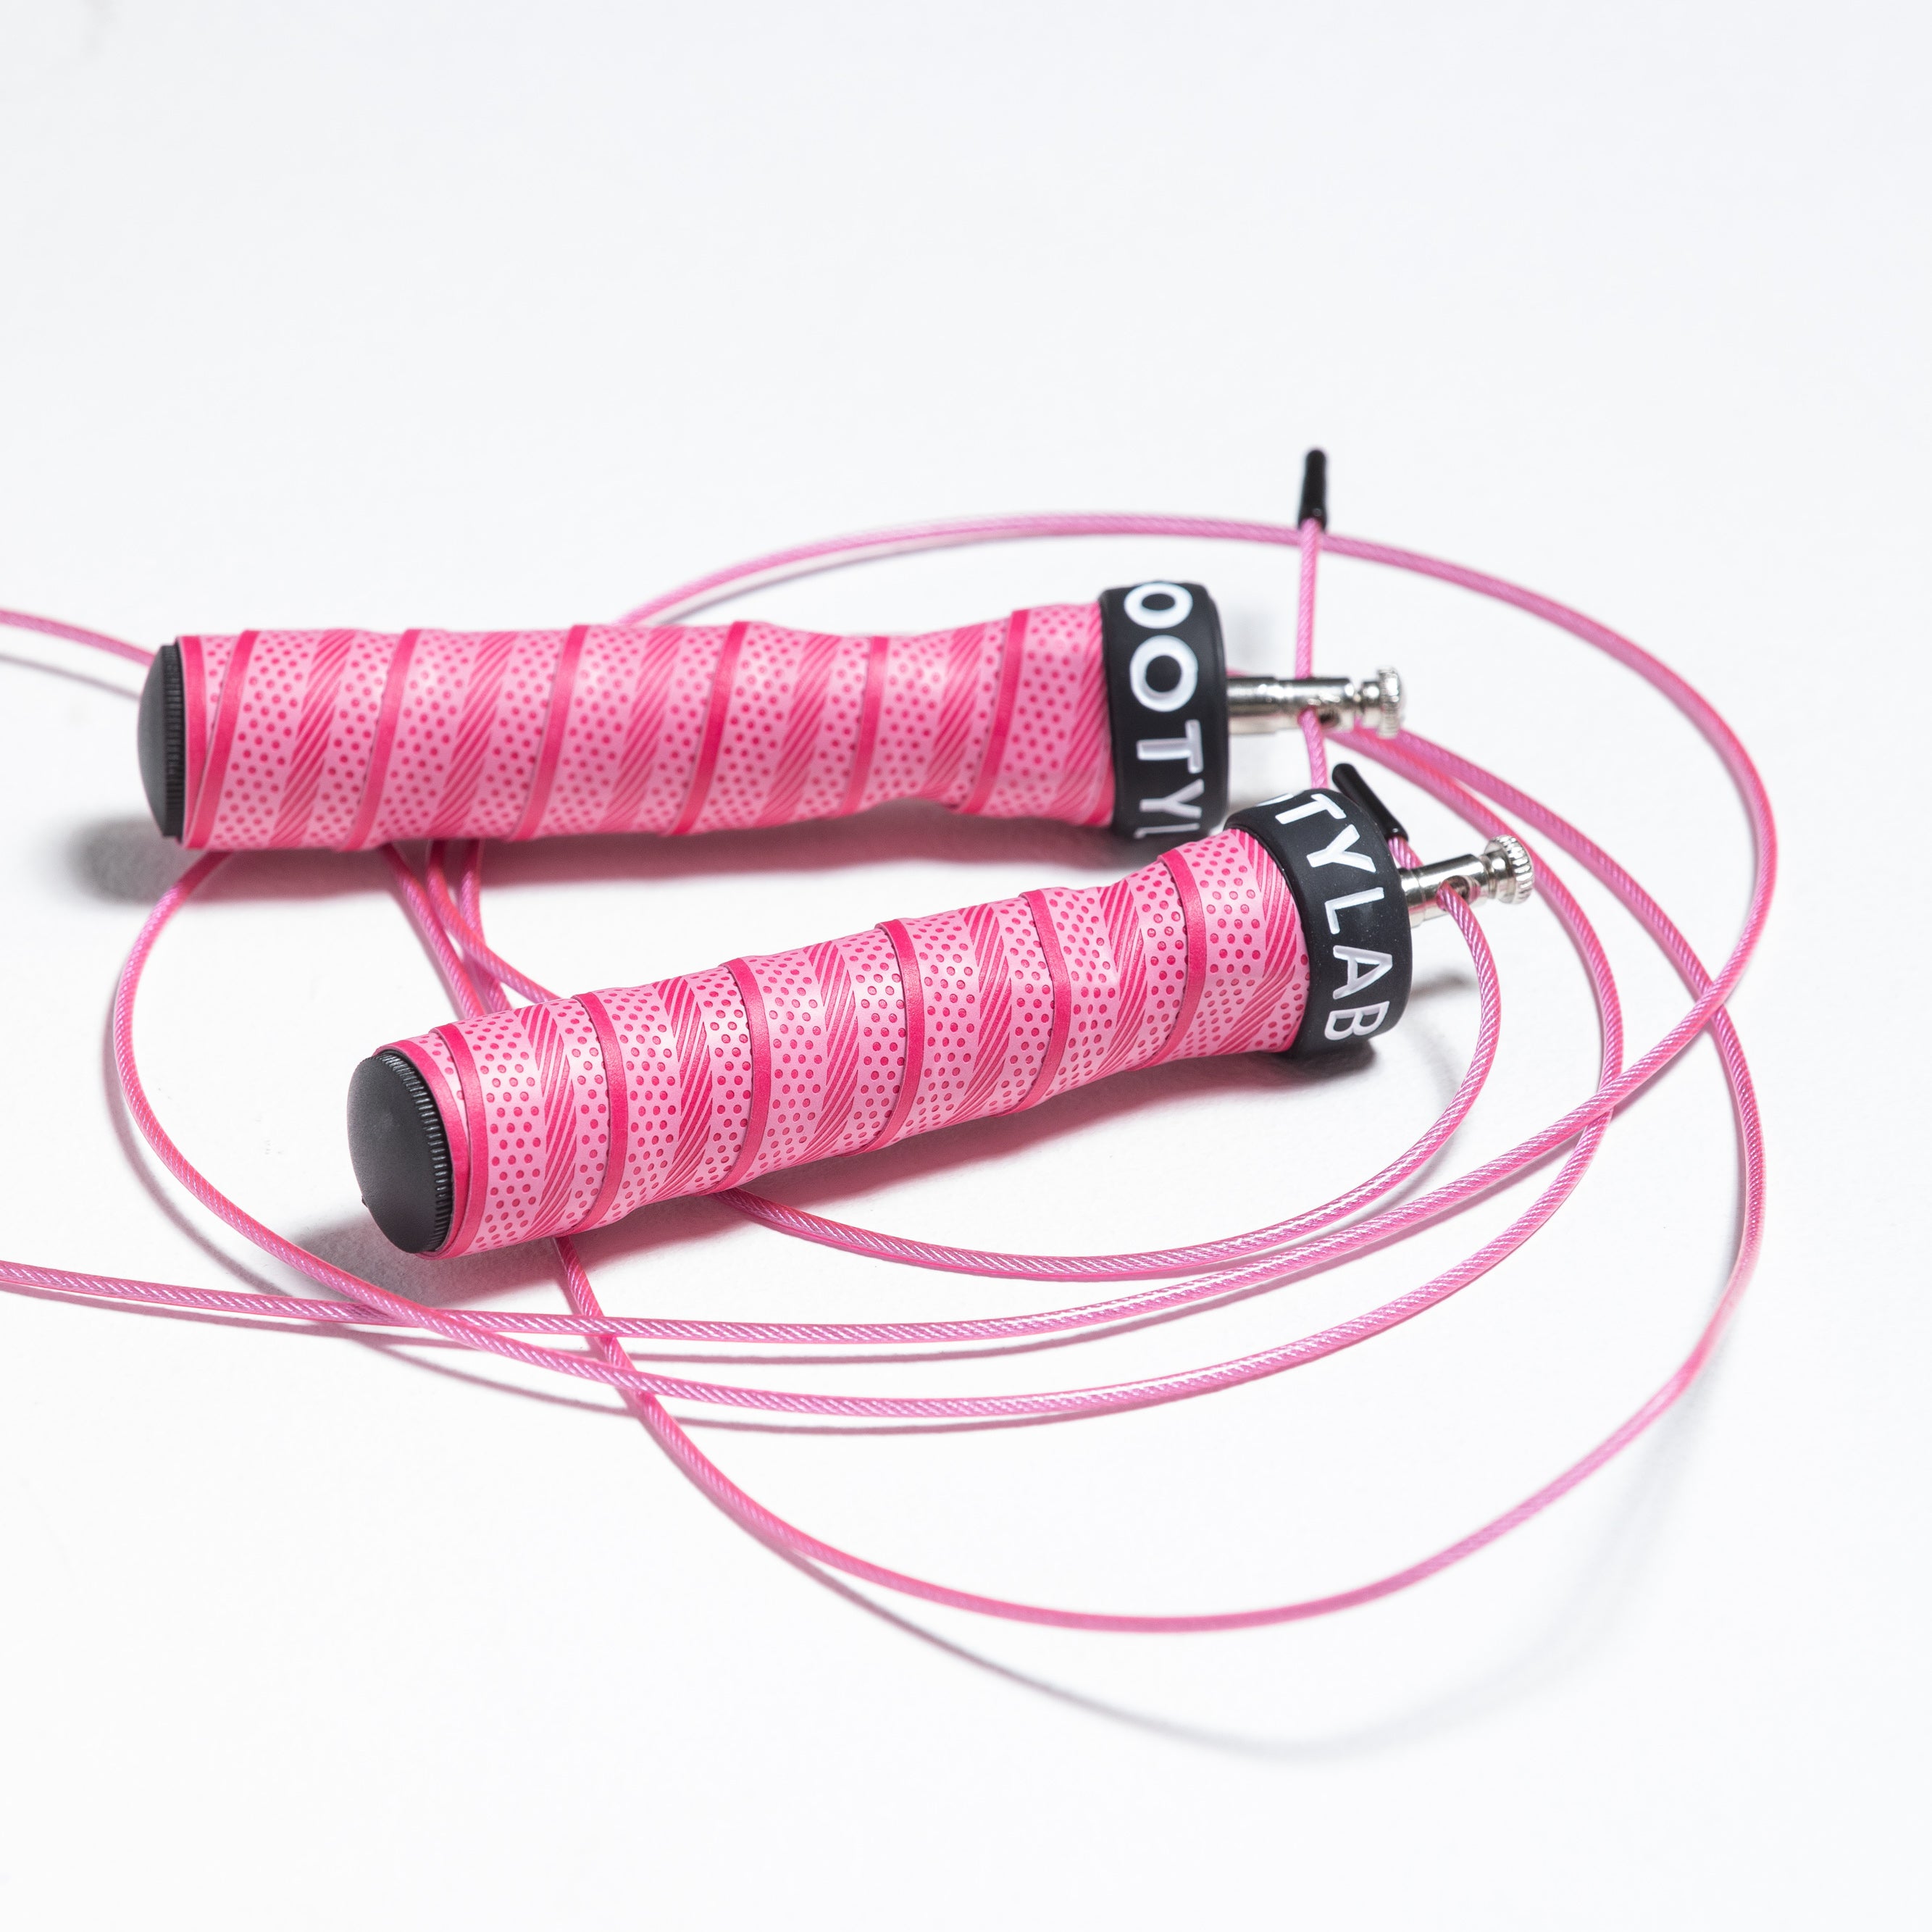 Adjustable Length Skipping Rope / Jump Wire (Pink)